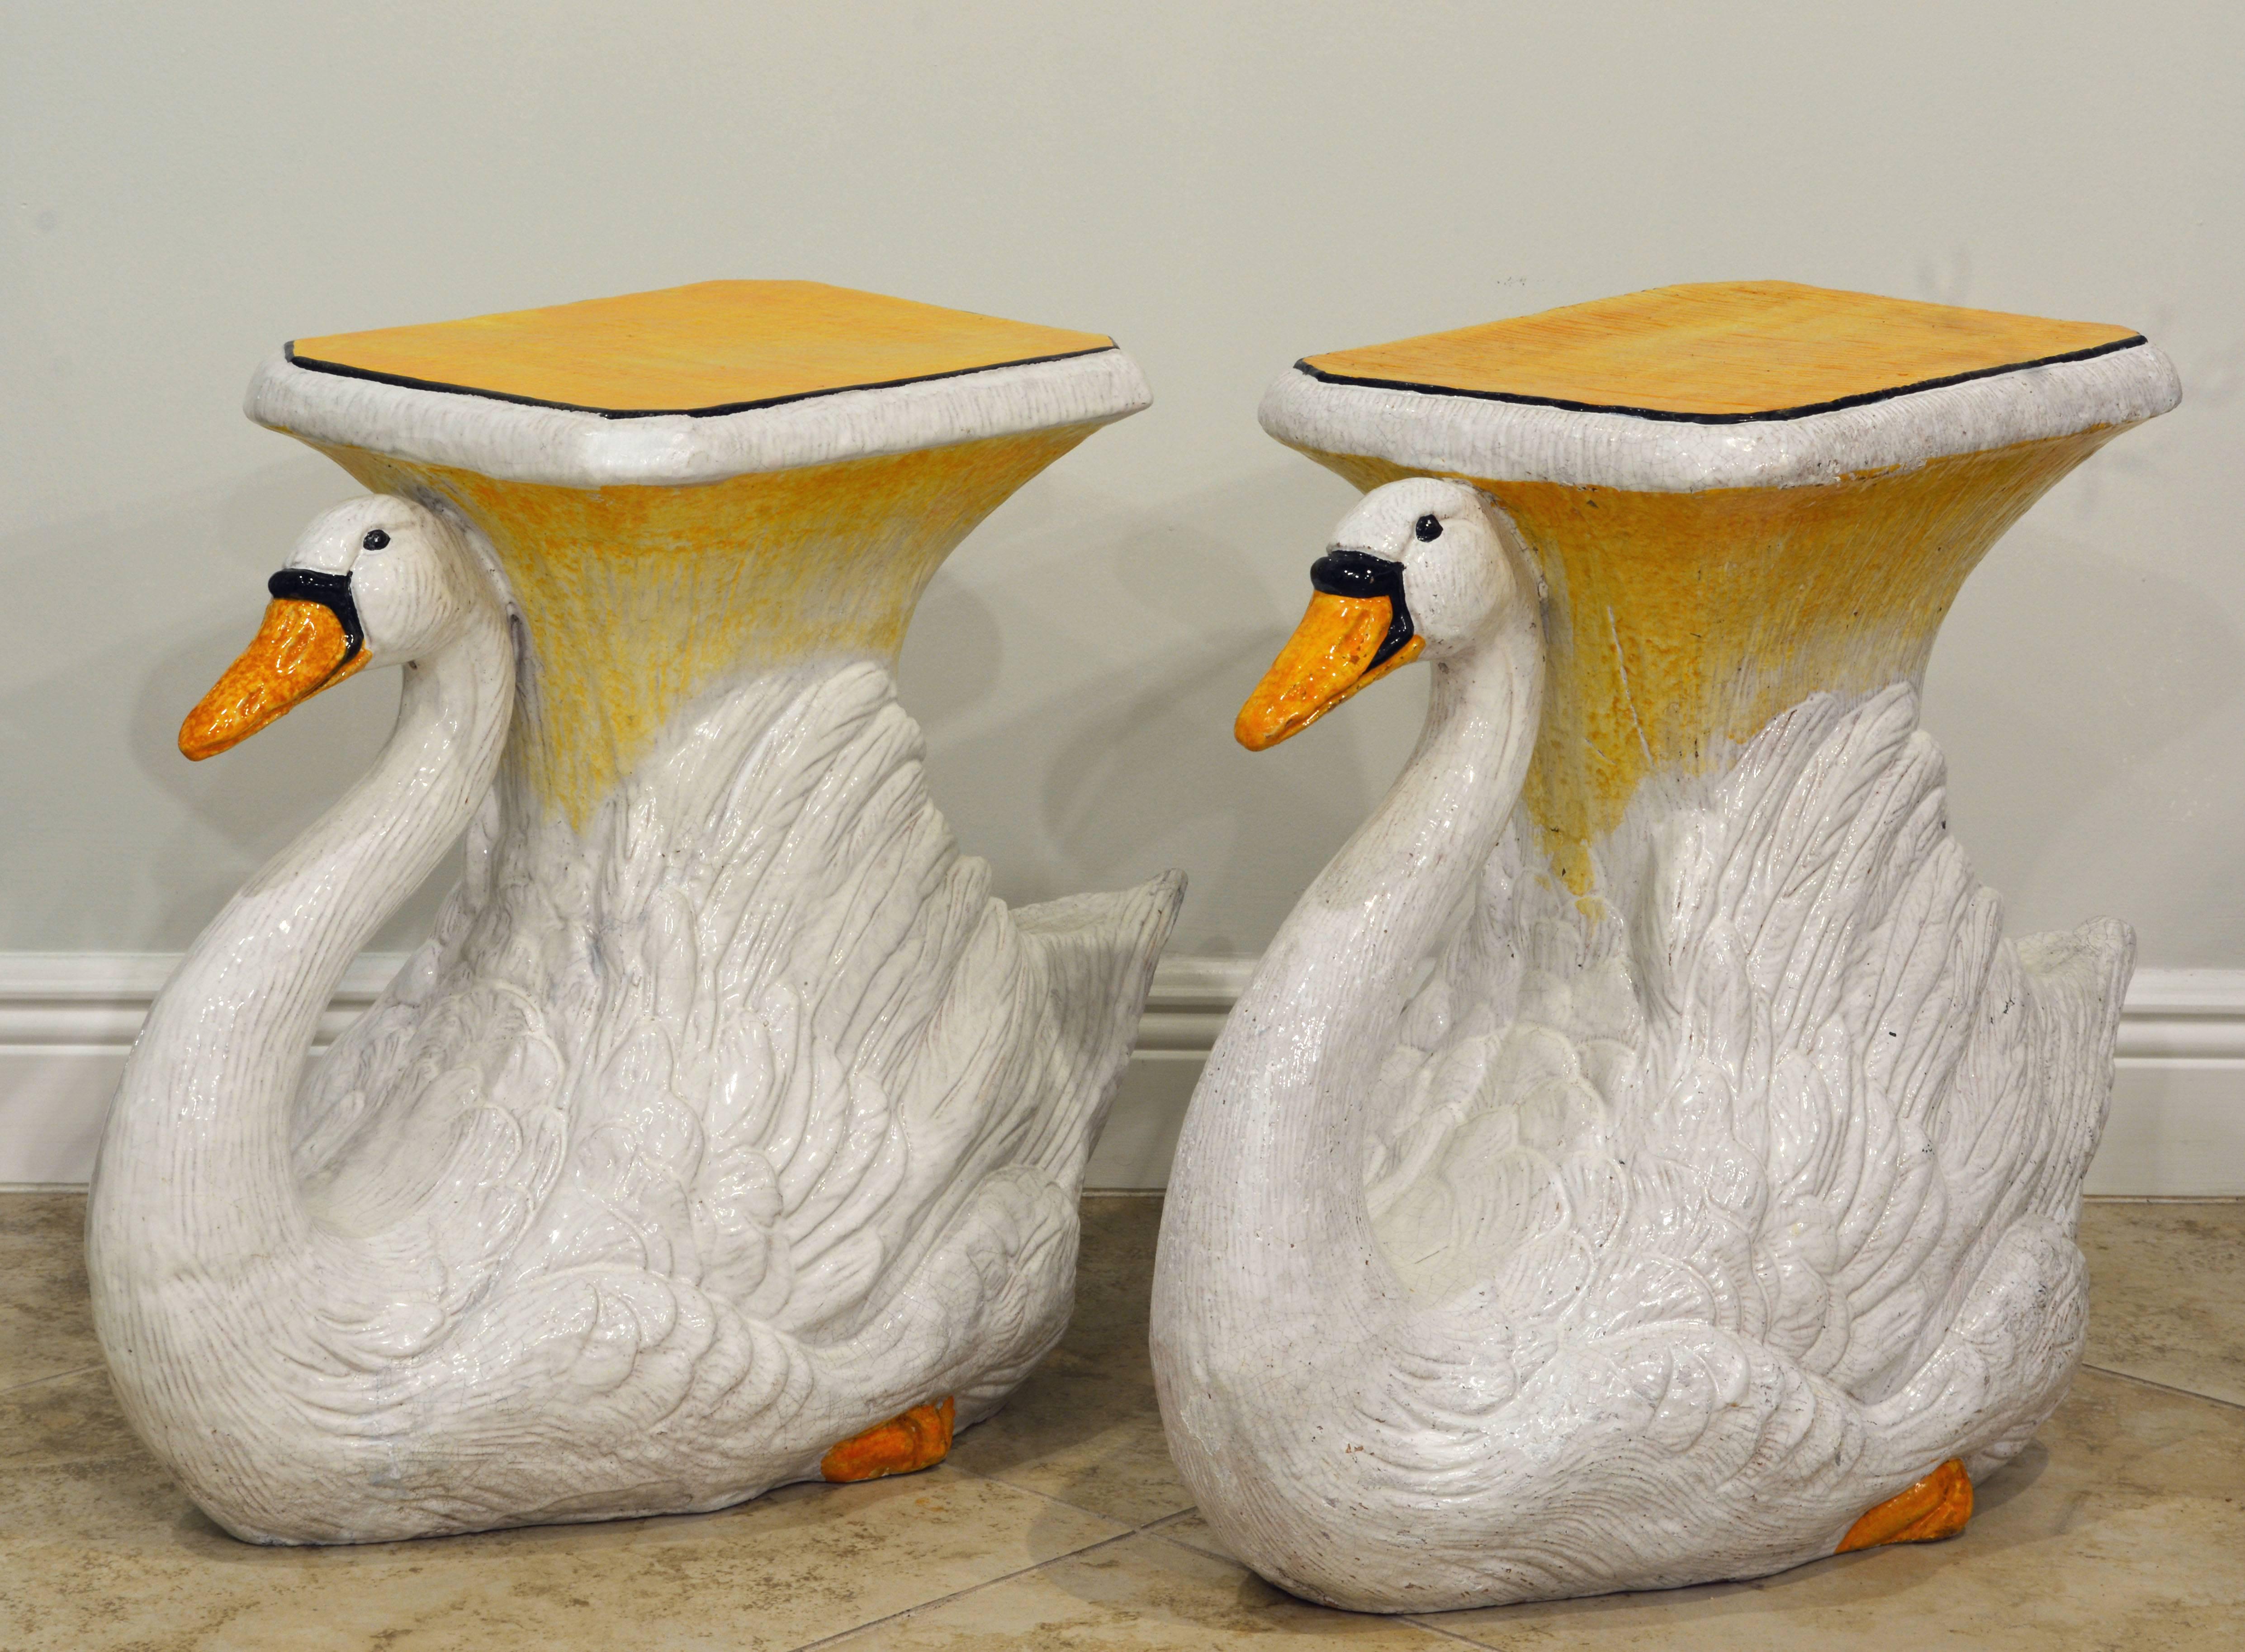 Made in the classic Italian way of glazed terracotta these garden seats in the shape of lifelike swans with yellow seats and orange beaks and feet make a wonderful impression. The swans are well modeled with lots of detail and will be suitable both